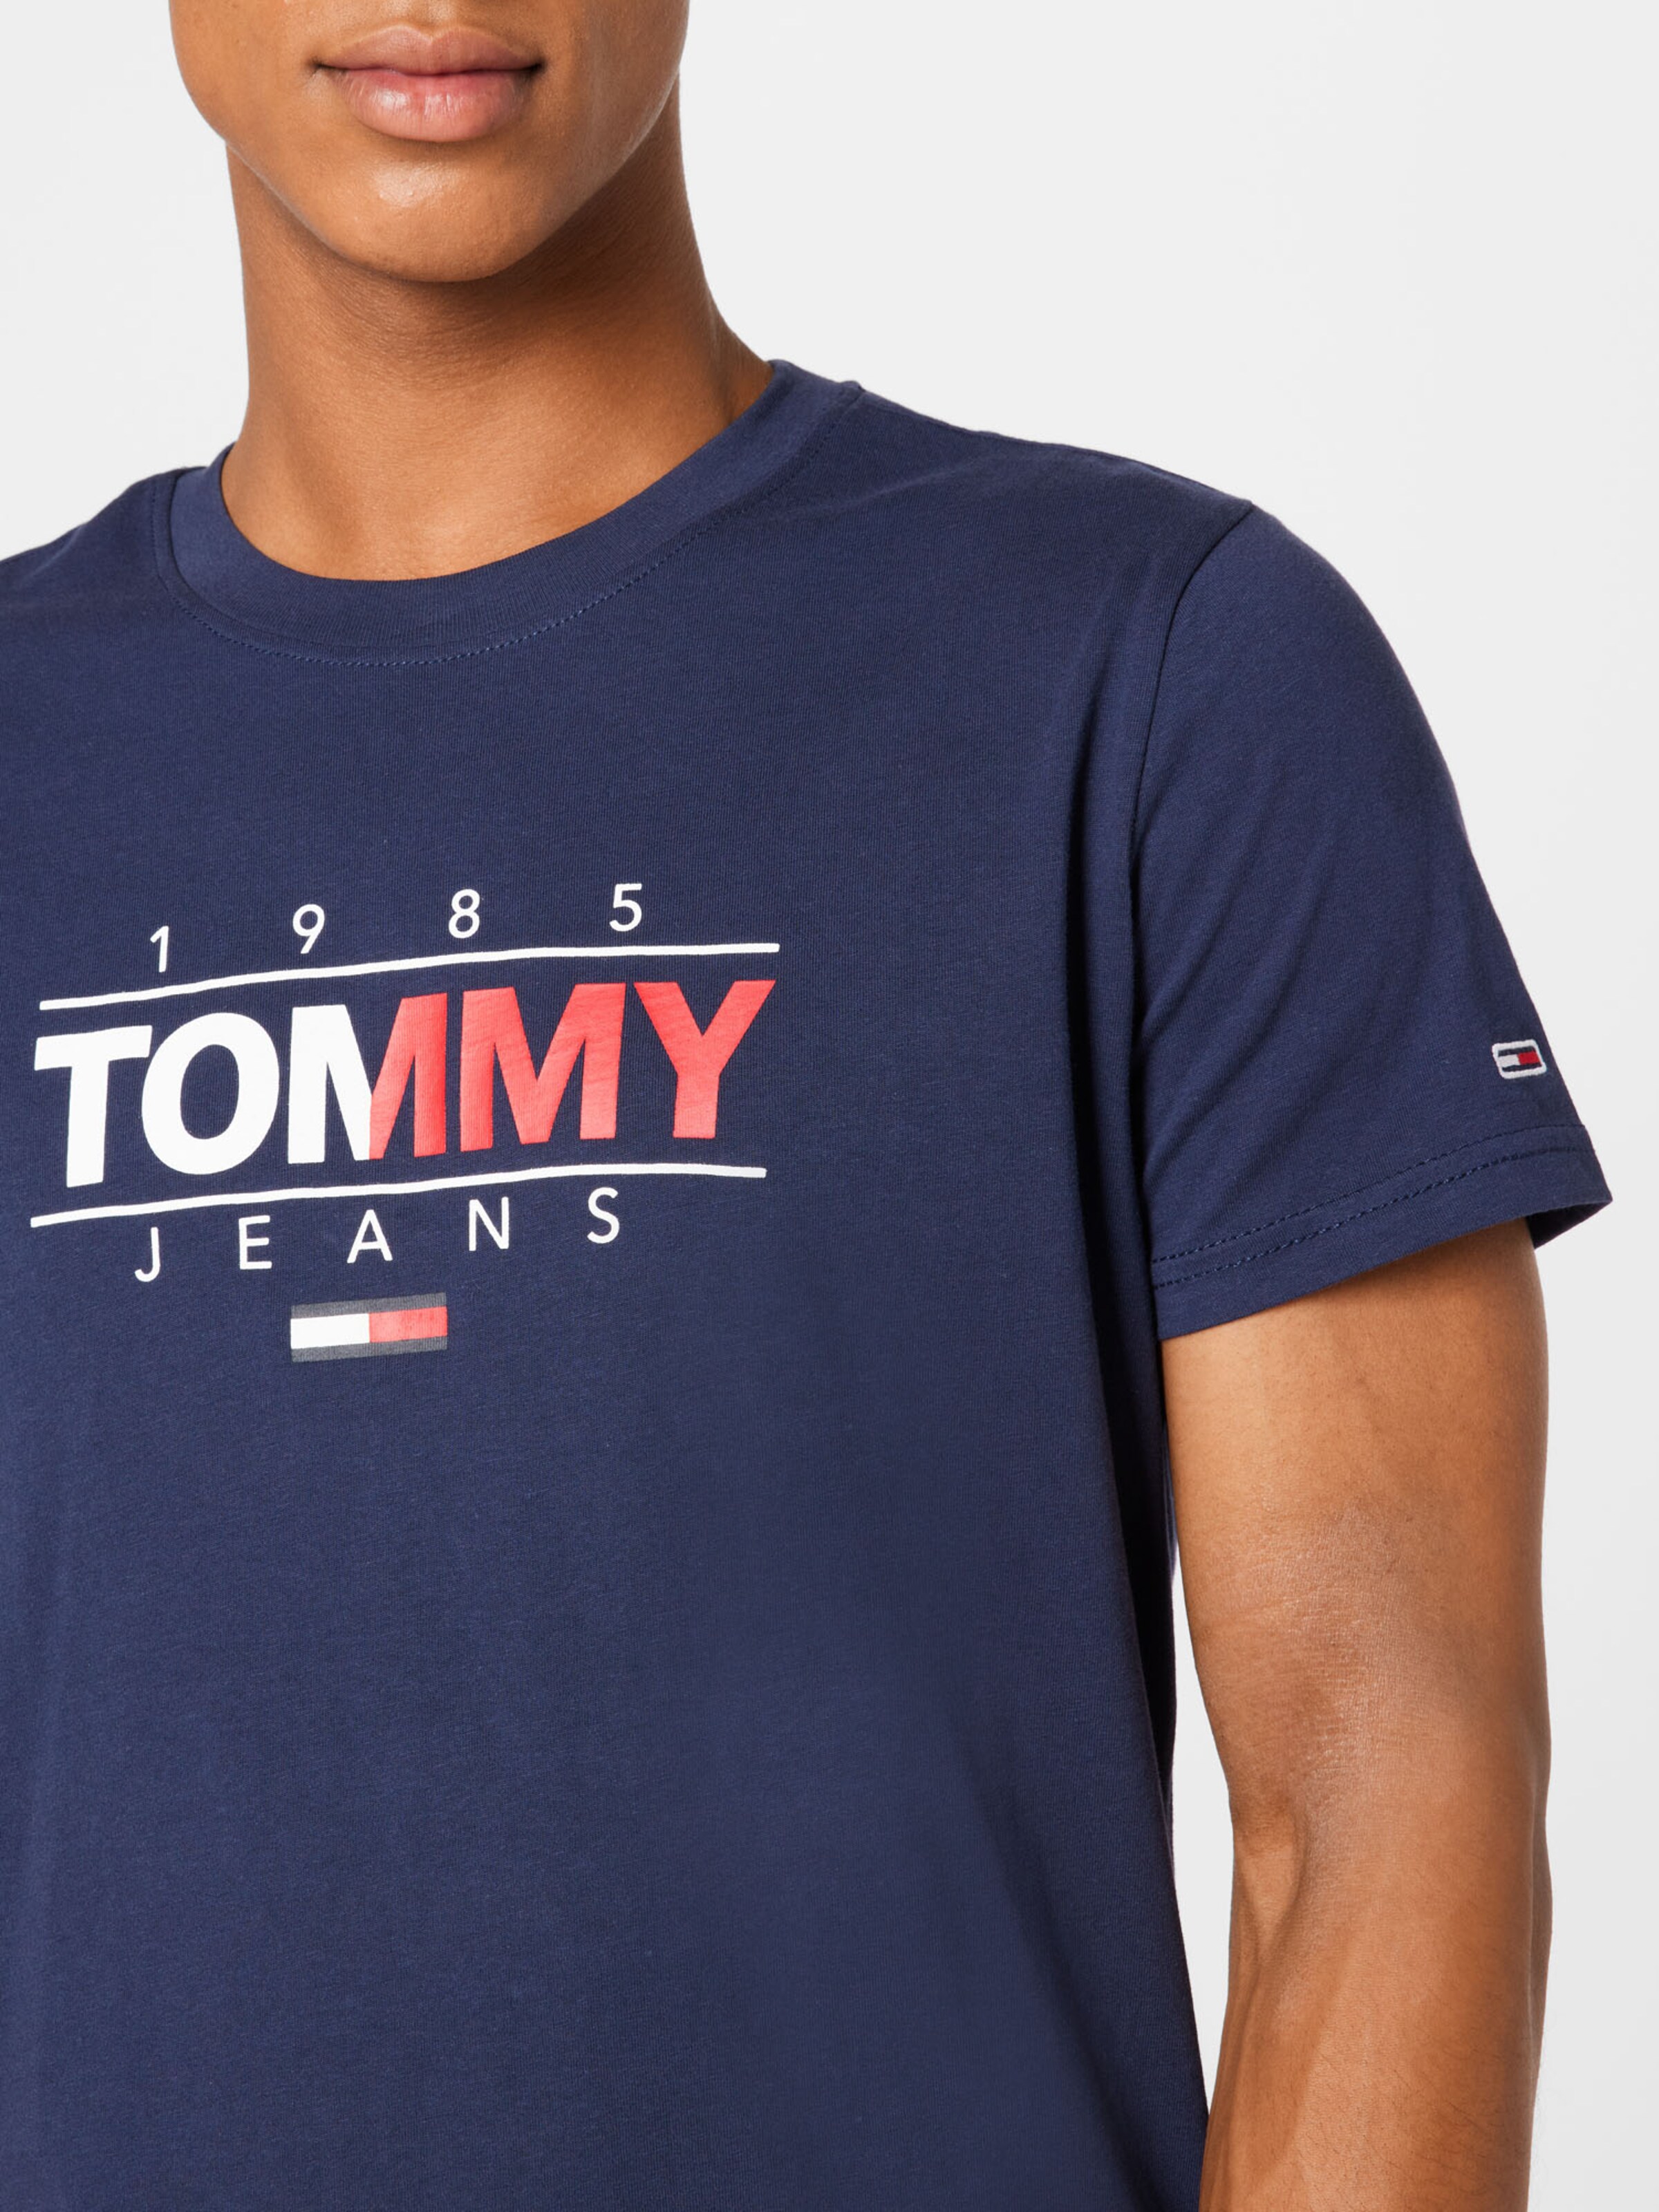 Männer Shirts Tommy Jeans T-Shirt in Navy - QI47634